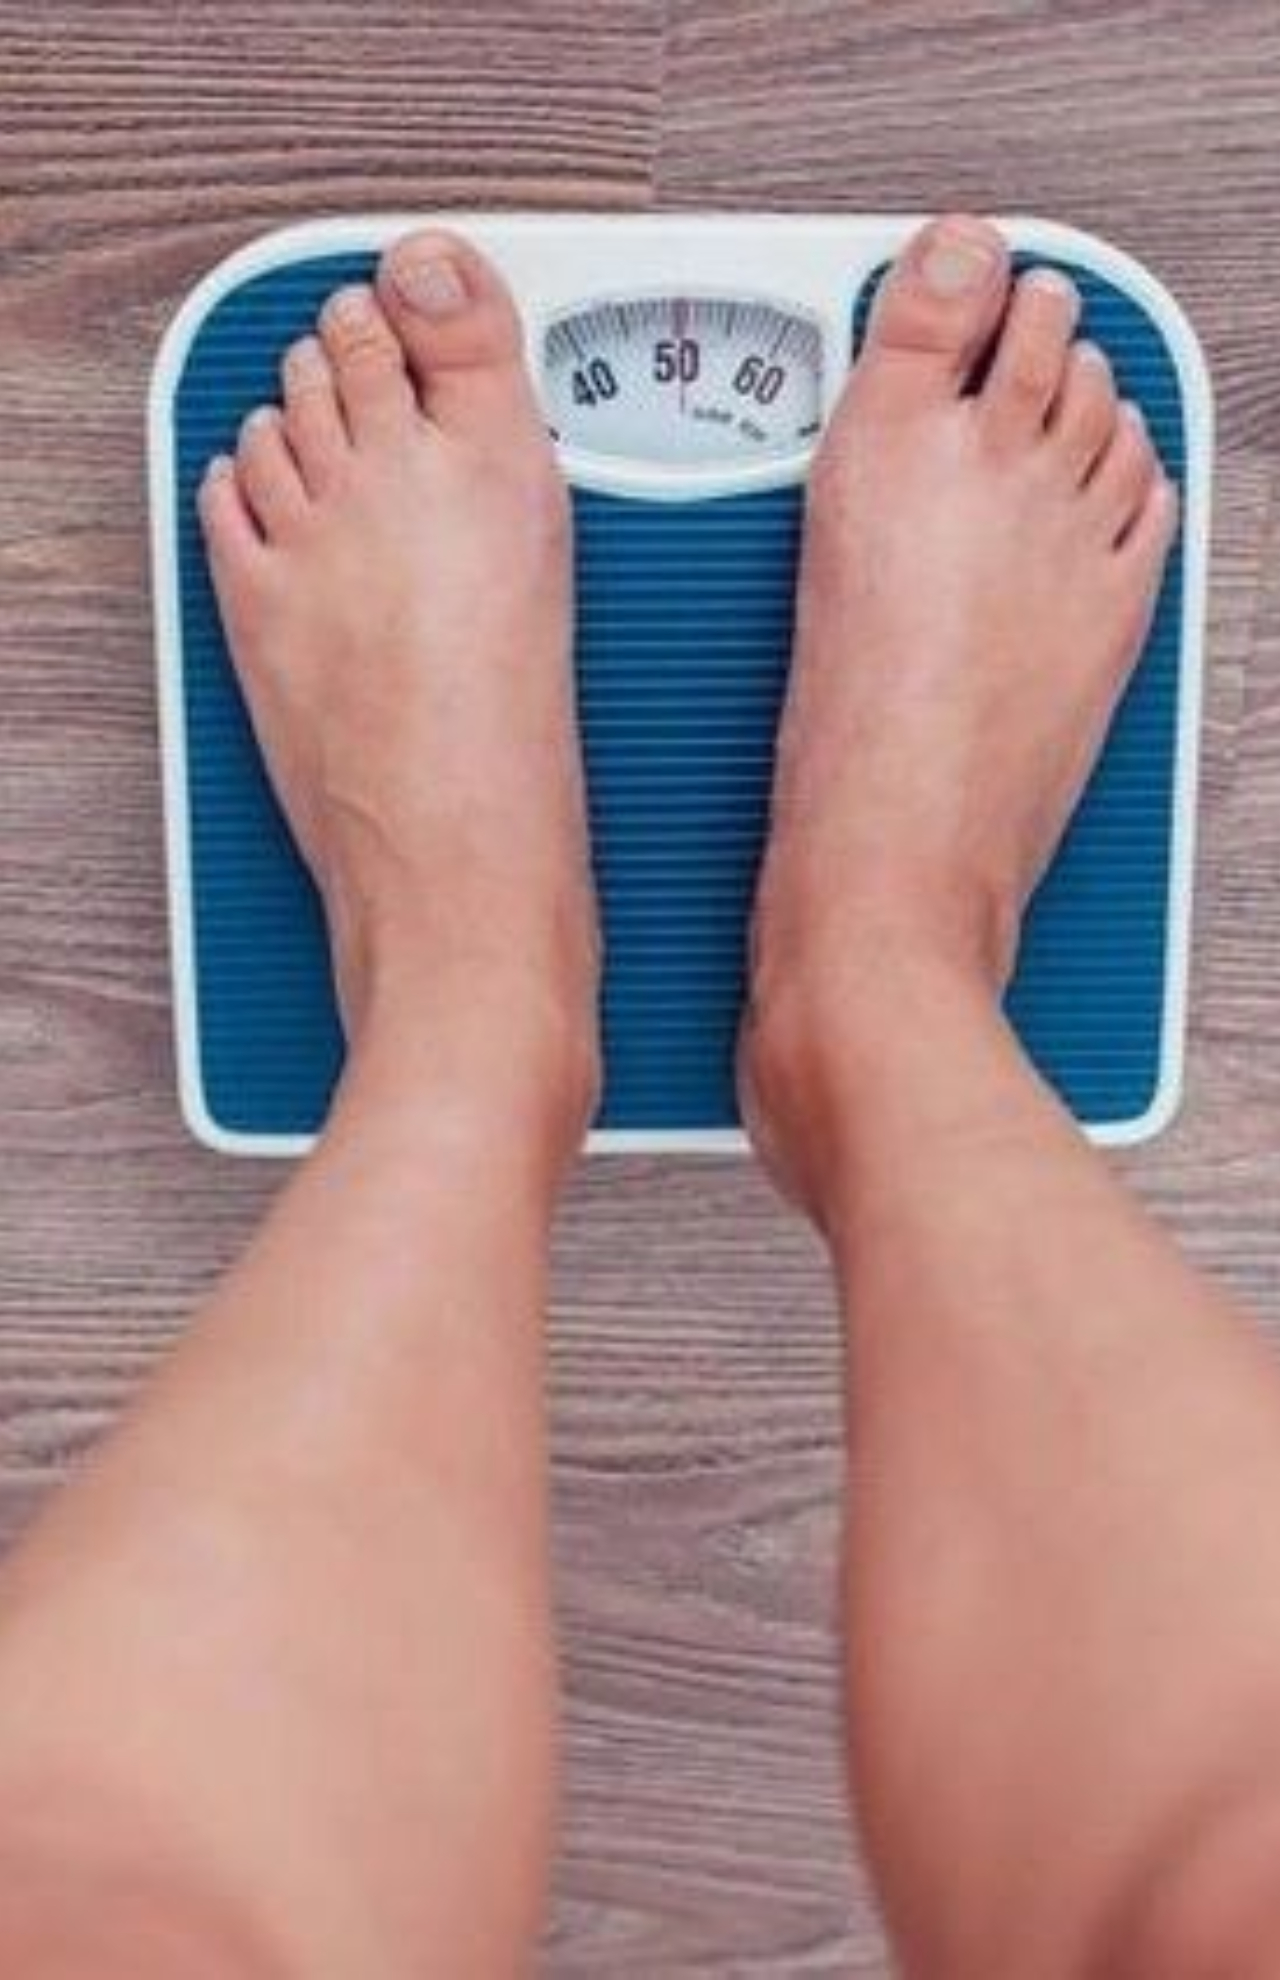 Here are 7 tips to lose weight naturally 